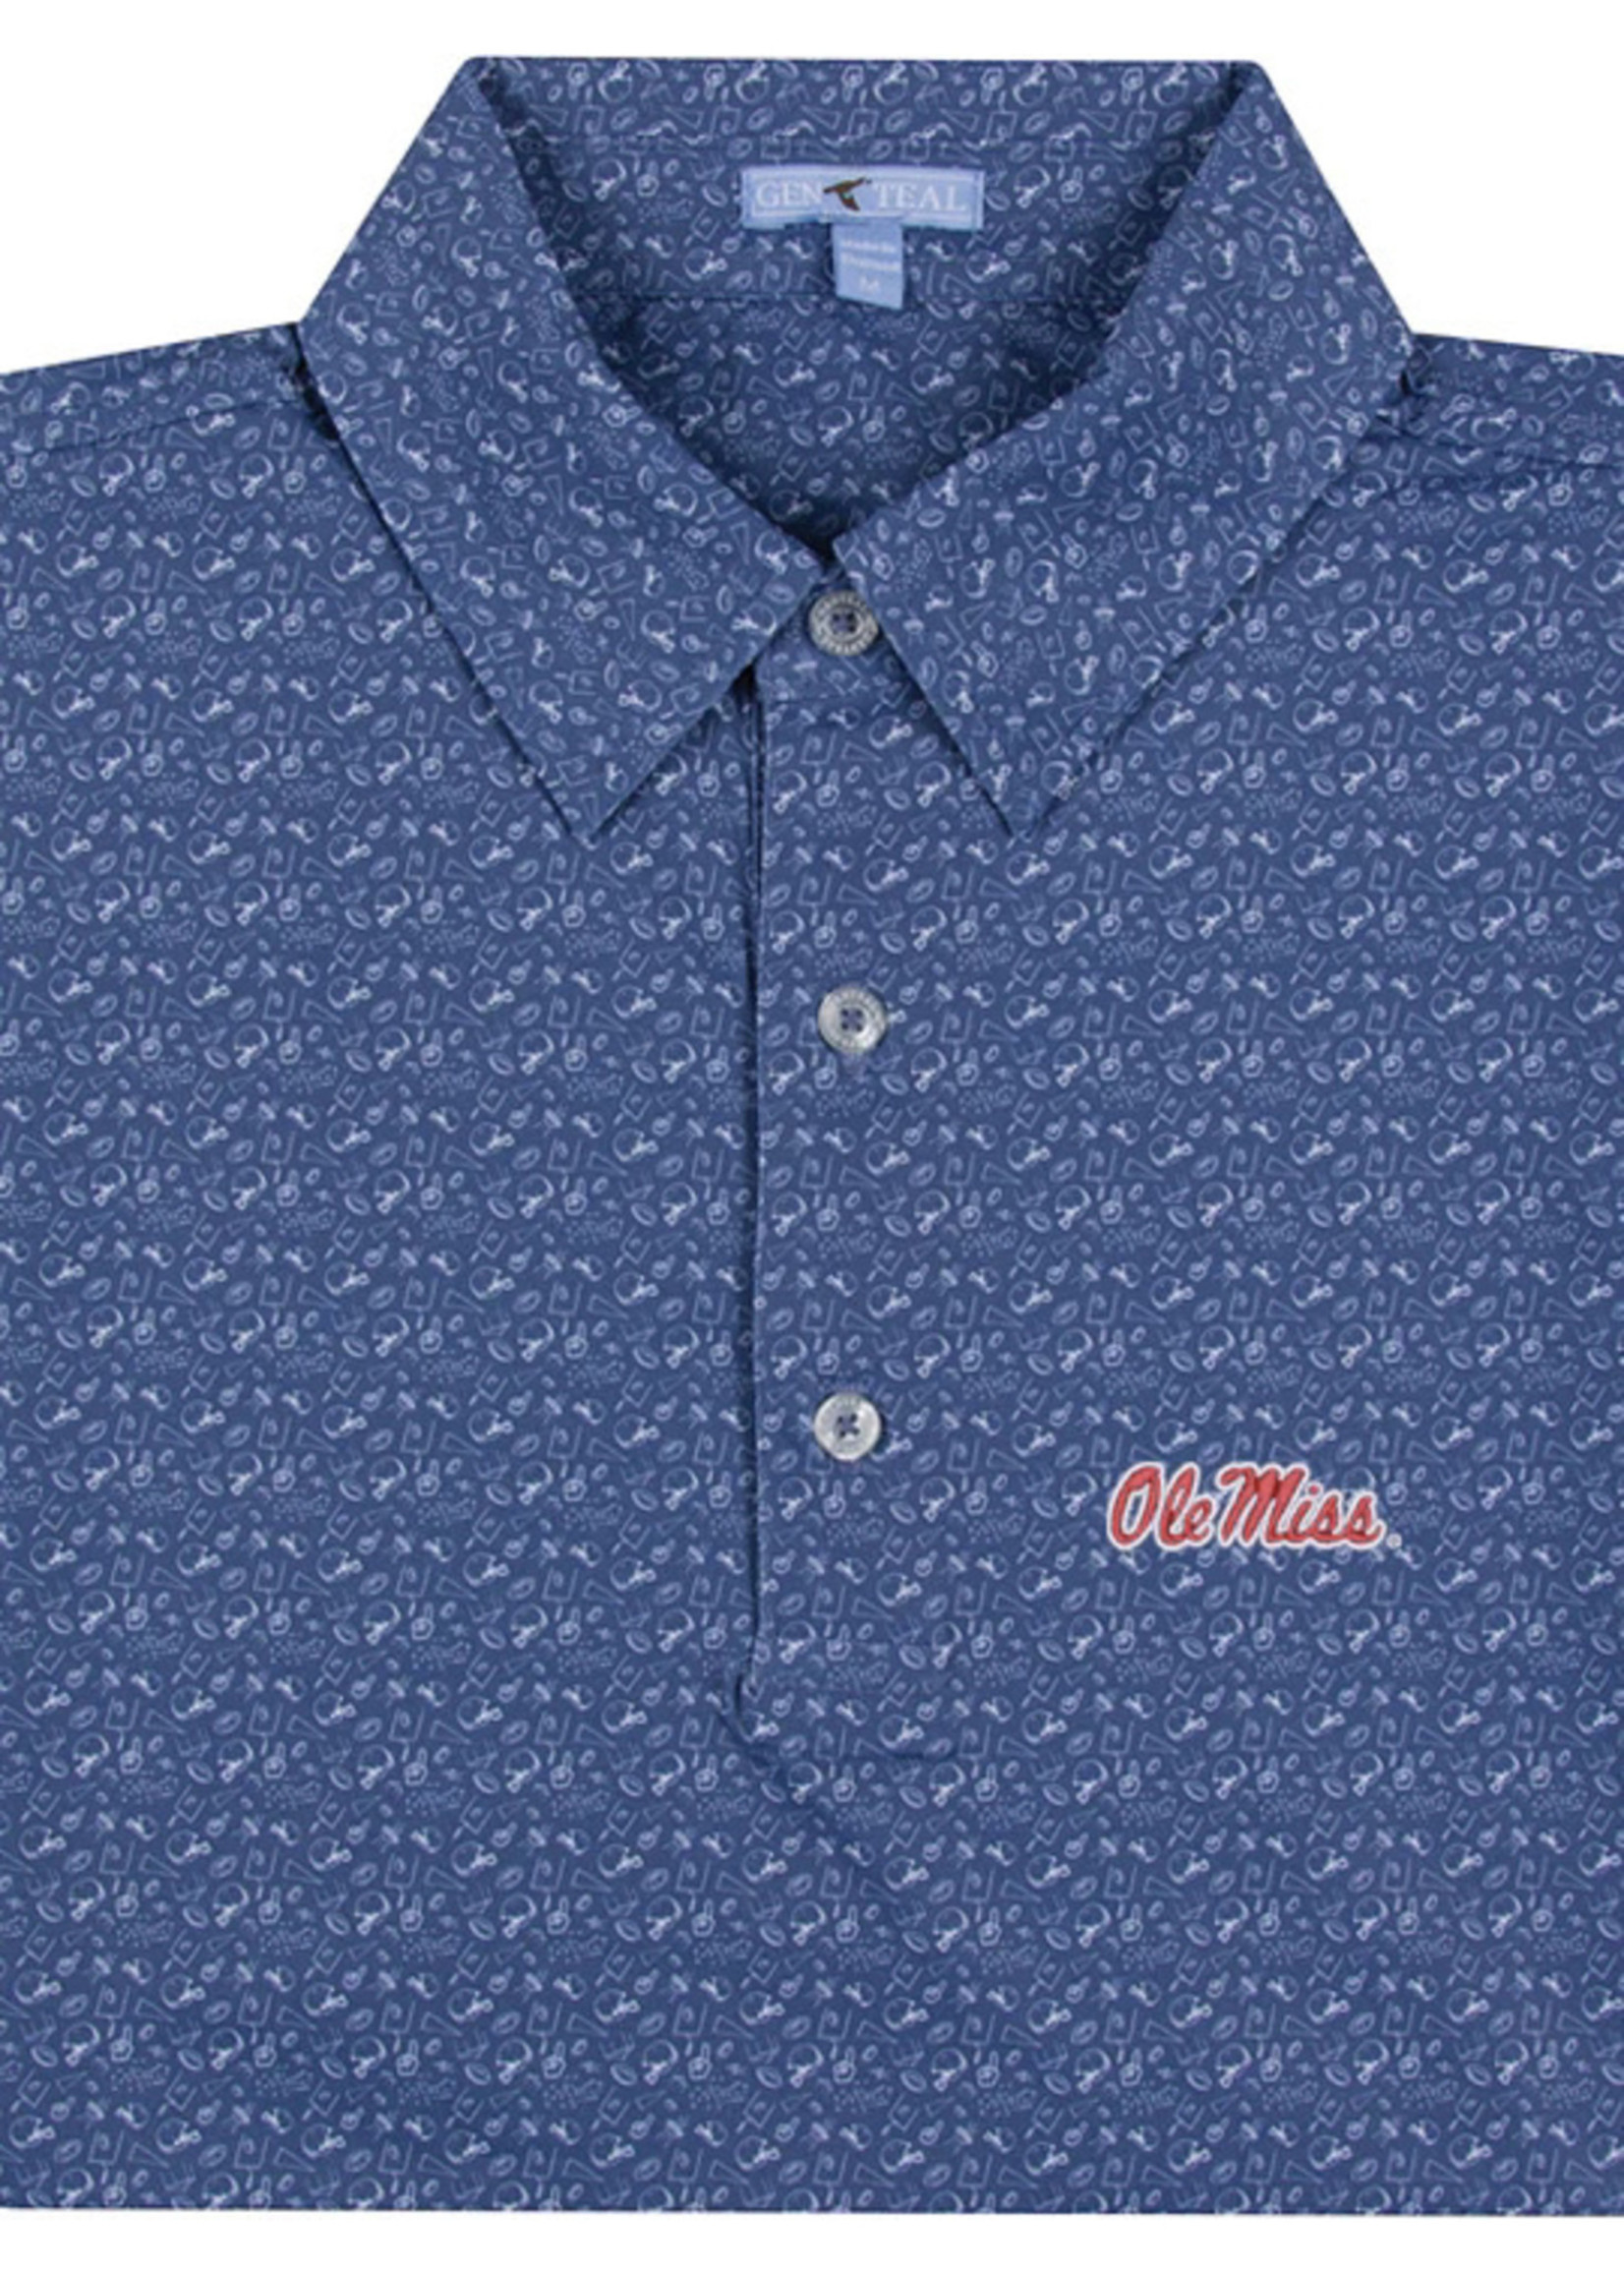 GenTeal Apparel Ole Miss Tailgate brr Print Polo